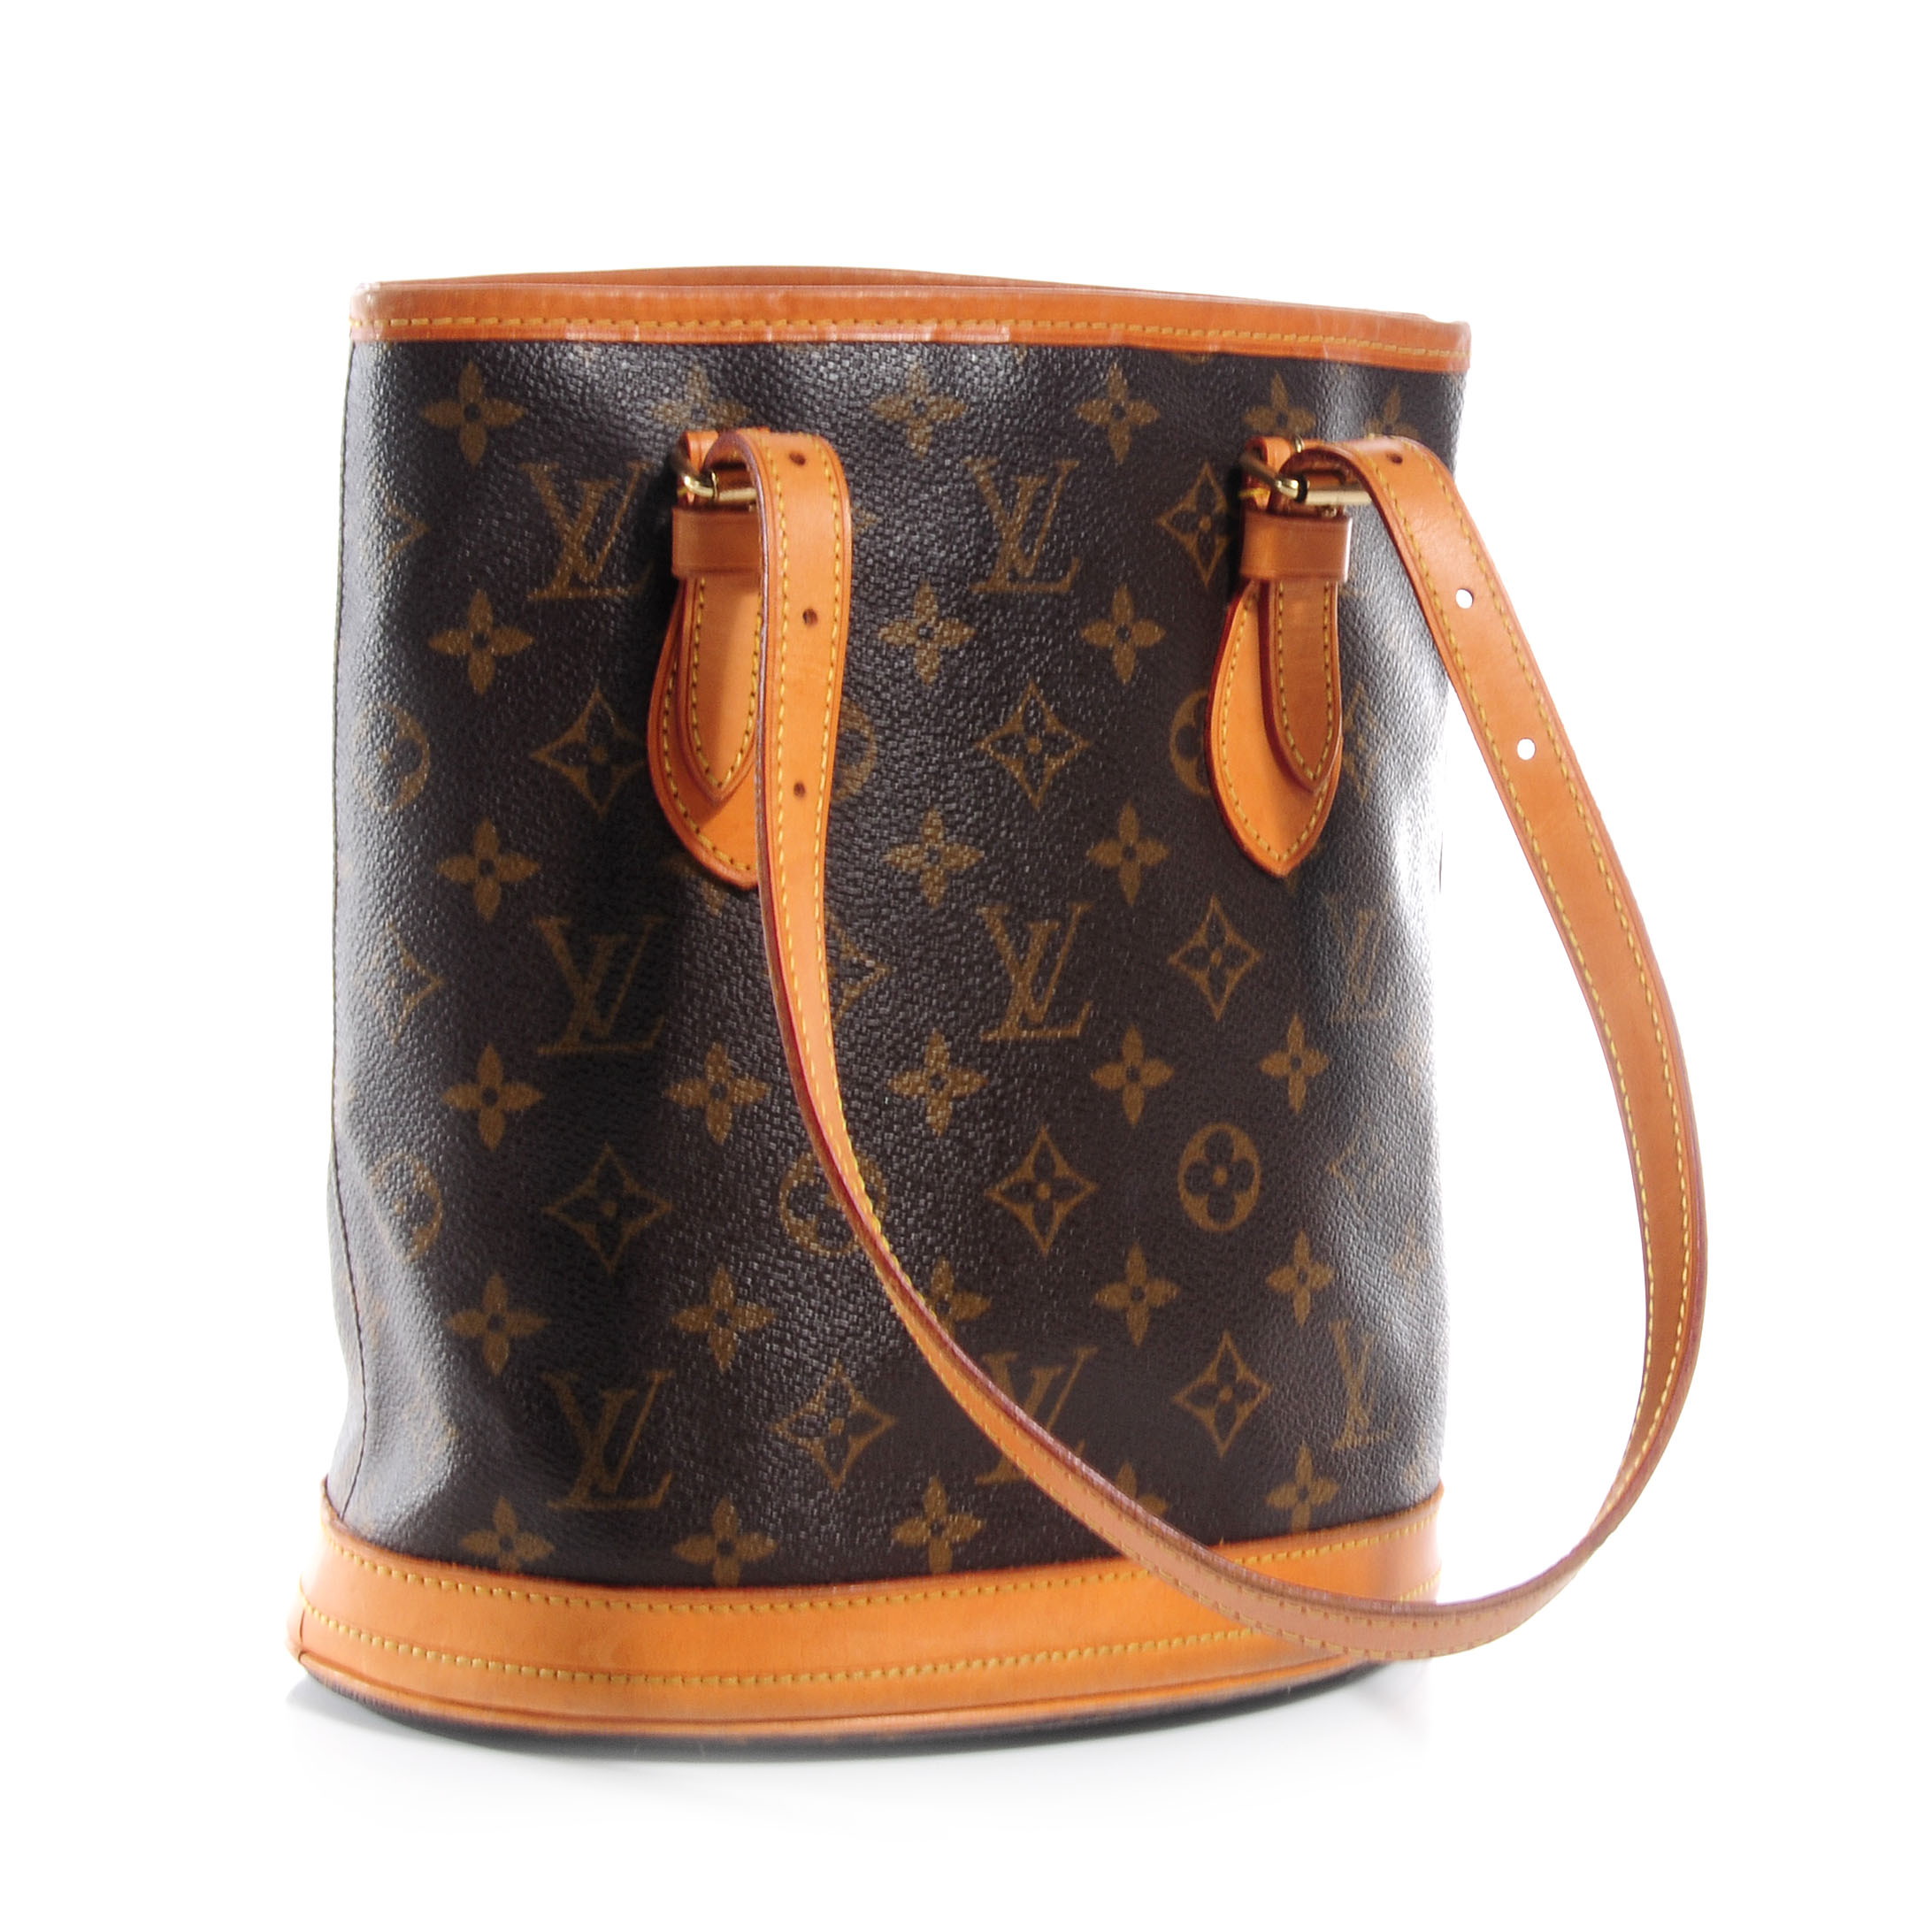 Louis Vuitton monogram petit bucket bag just came in!! This has a pristine  inside and bag is in excellent condi…